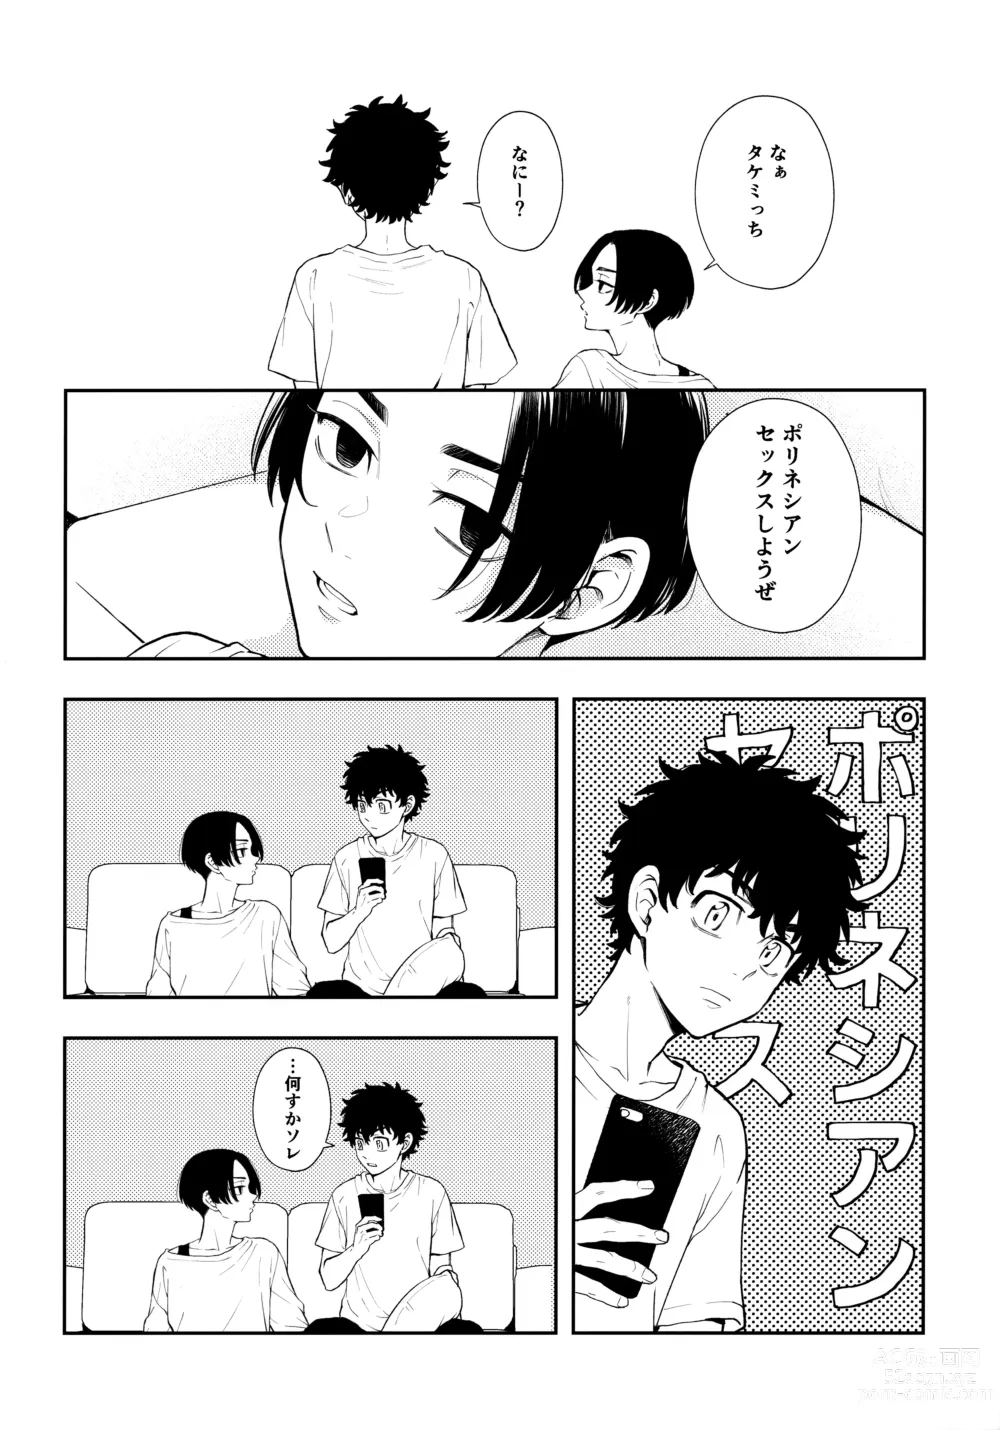 Page 3 of doujinshi Count 5